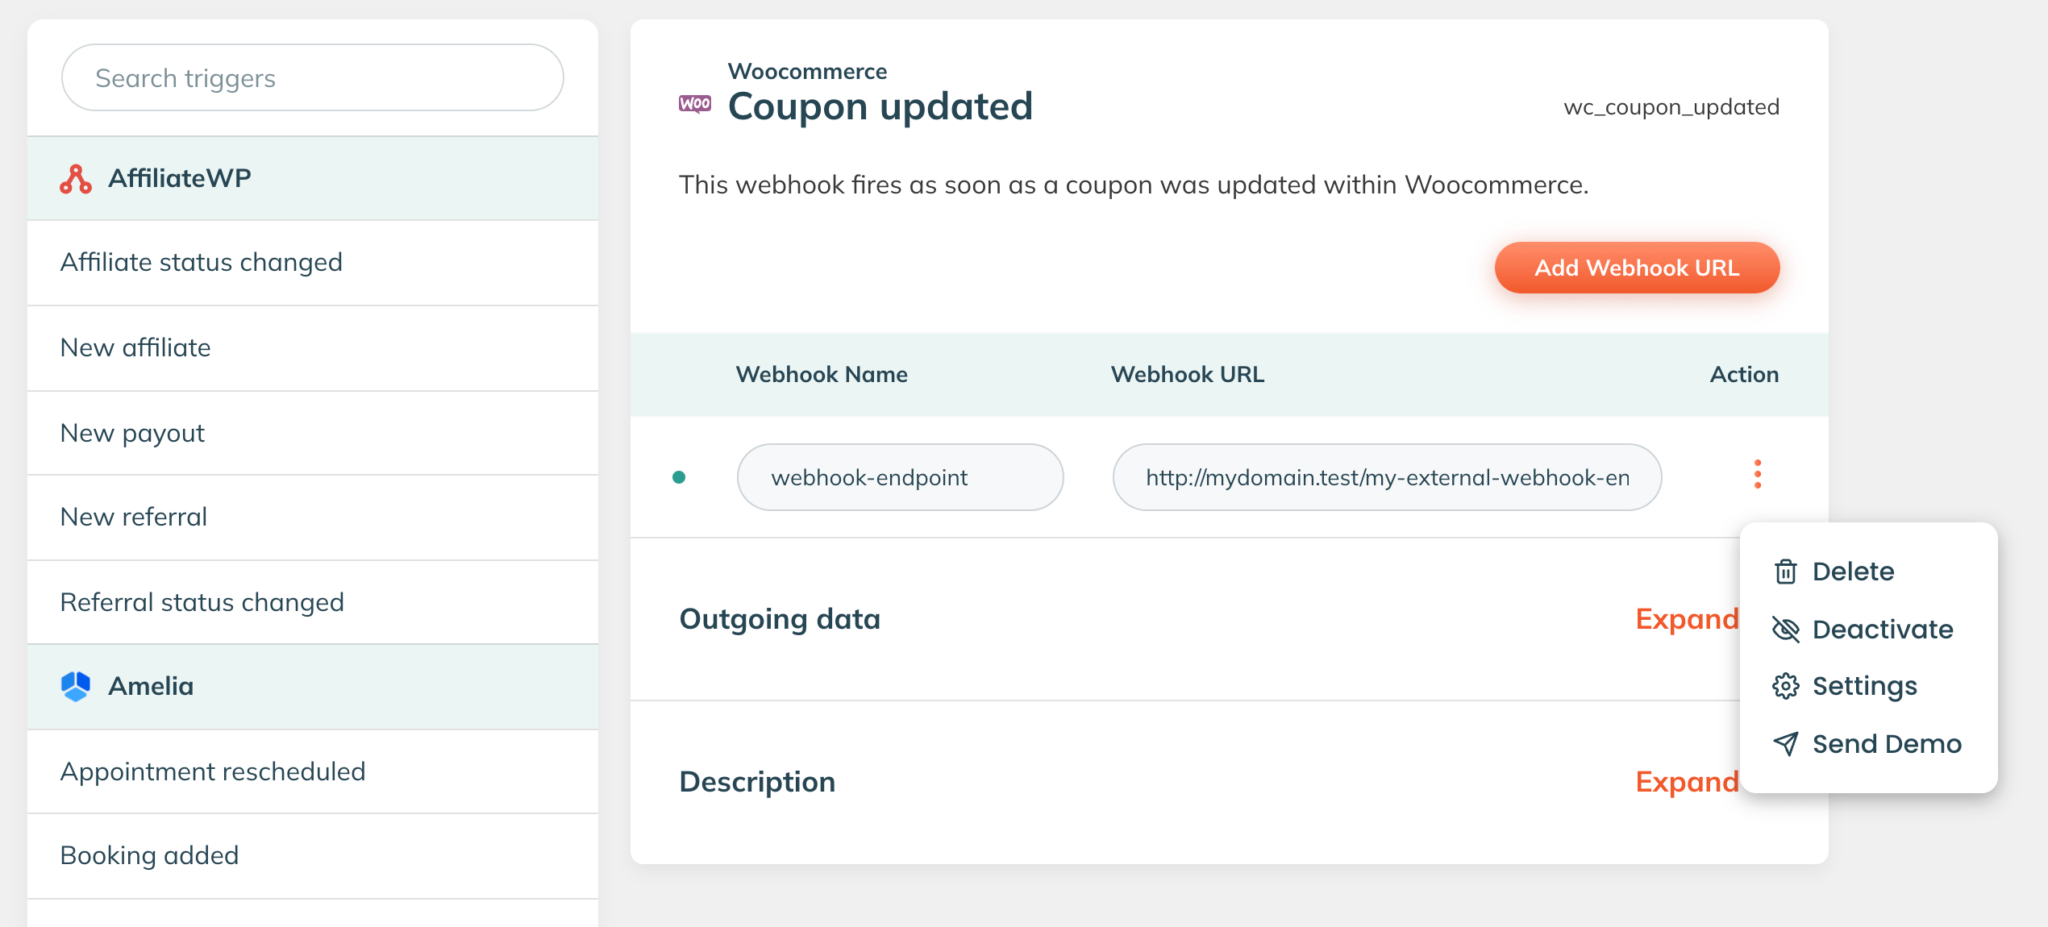 The WP Webhooks screen of the Membership canceled trigger